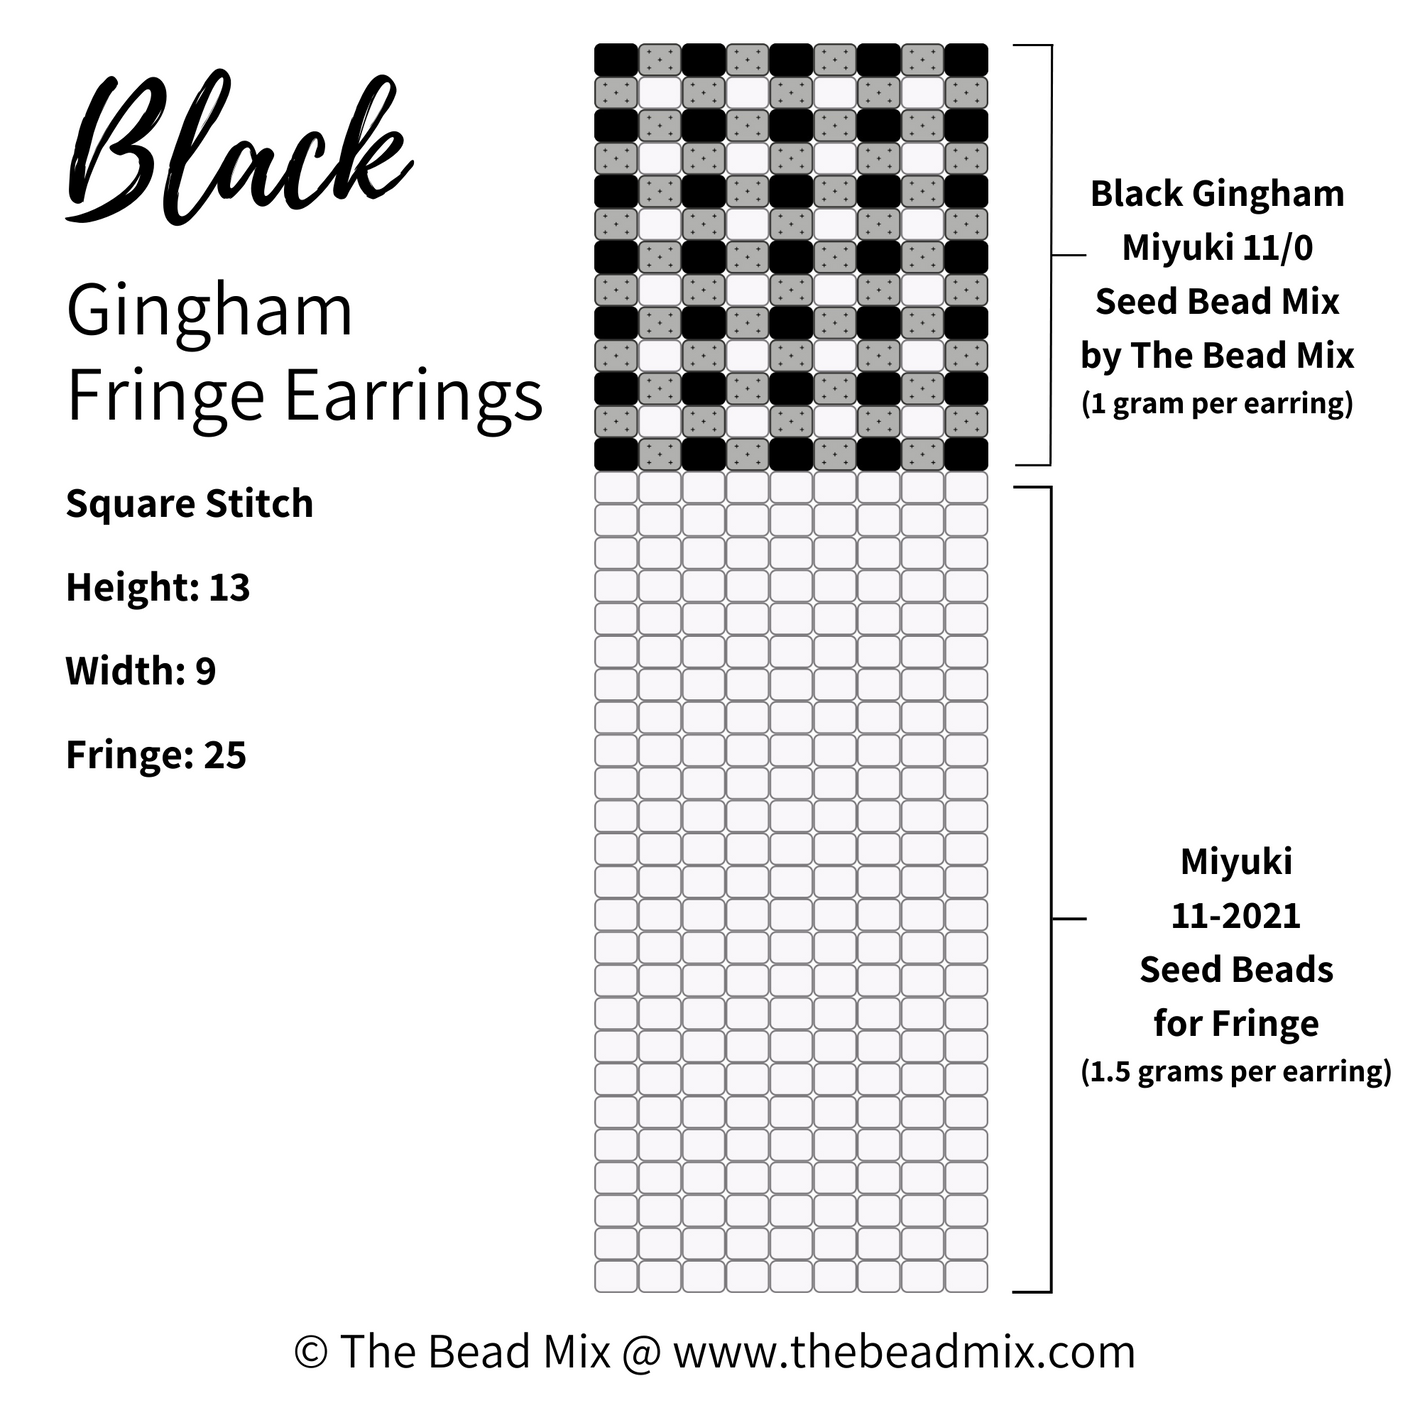 Free square stitch beading pattern to make black gingham pattern fringe earrings by The Bead Mix